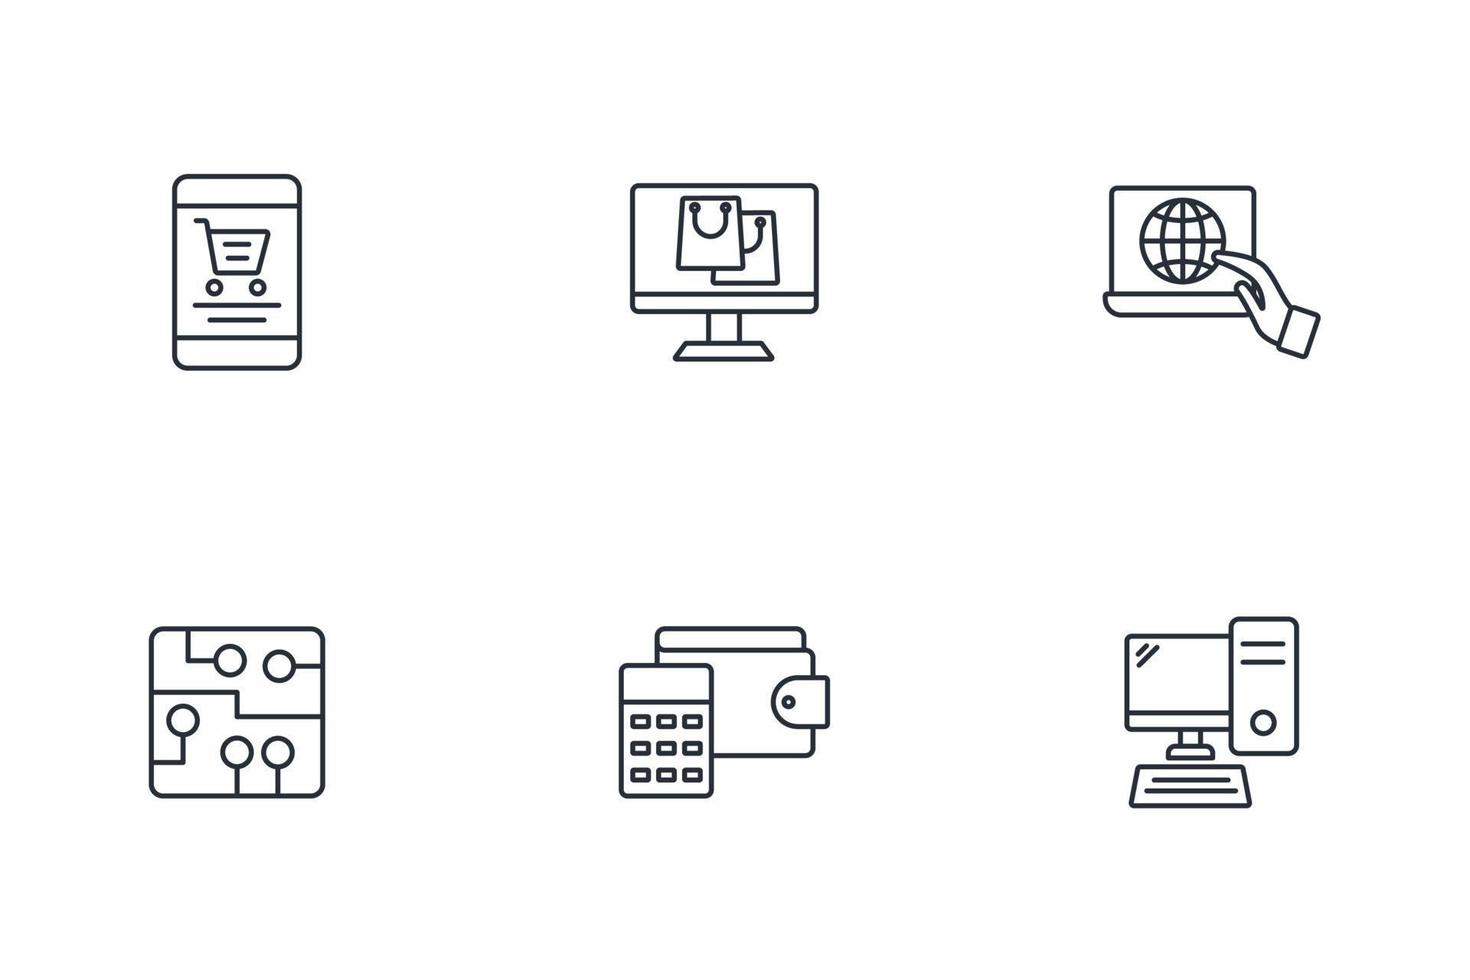 E-Payment Internet Banking Technology icons set . E-Payment Internet Banking Technology pack symbol vector elements for infographic web